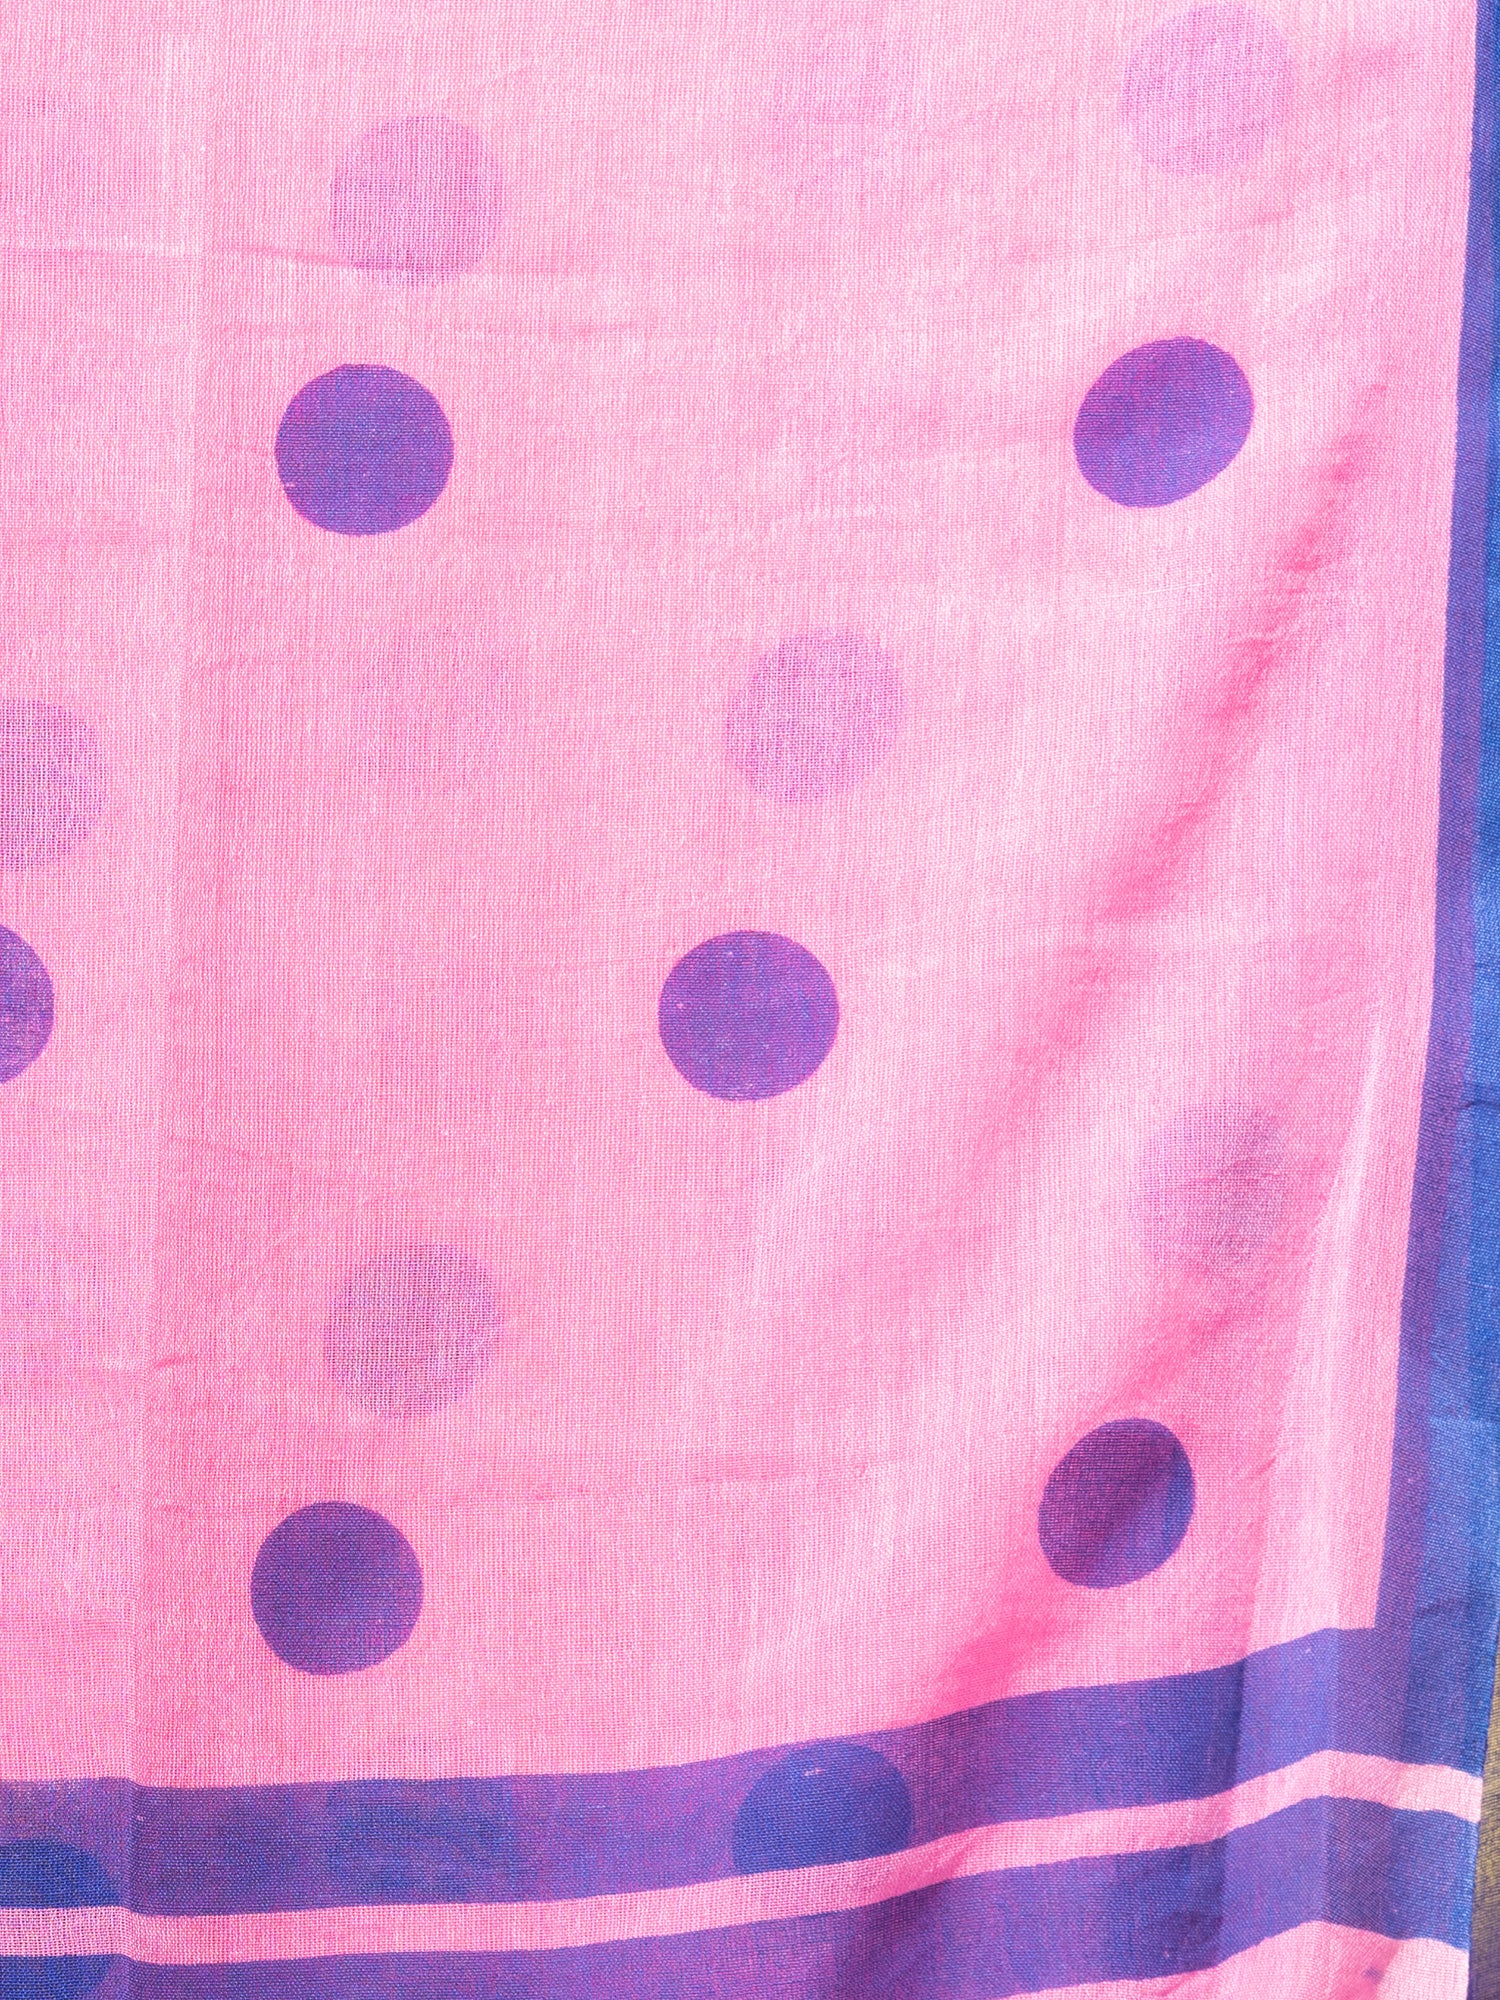 Women's Pink Cotton Saree With All Over Blue Polka Dots - In Weave Sarees